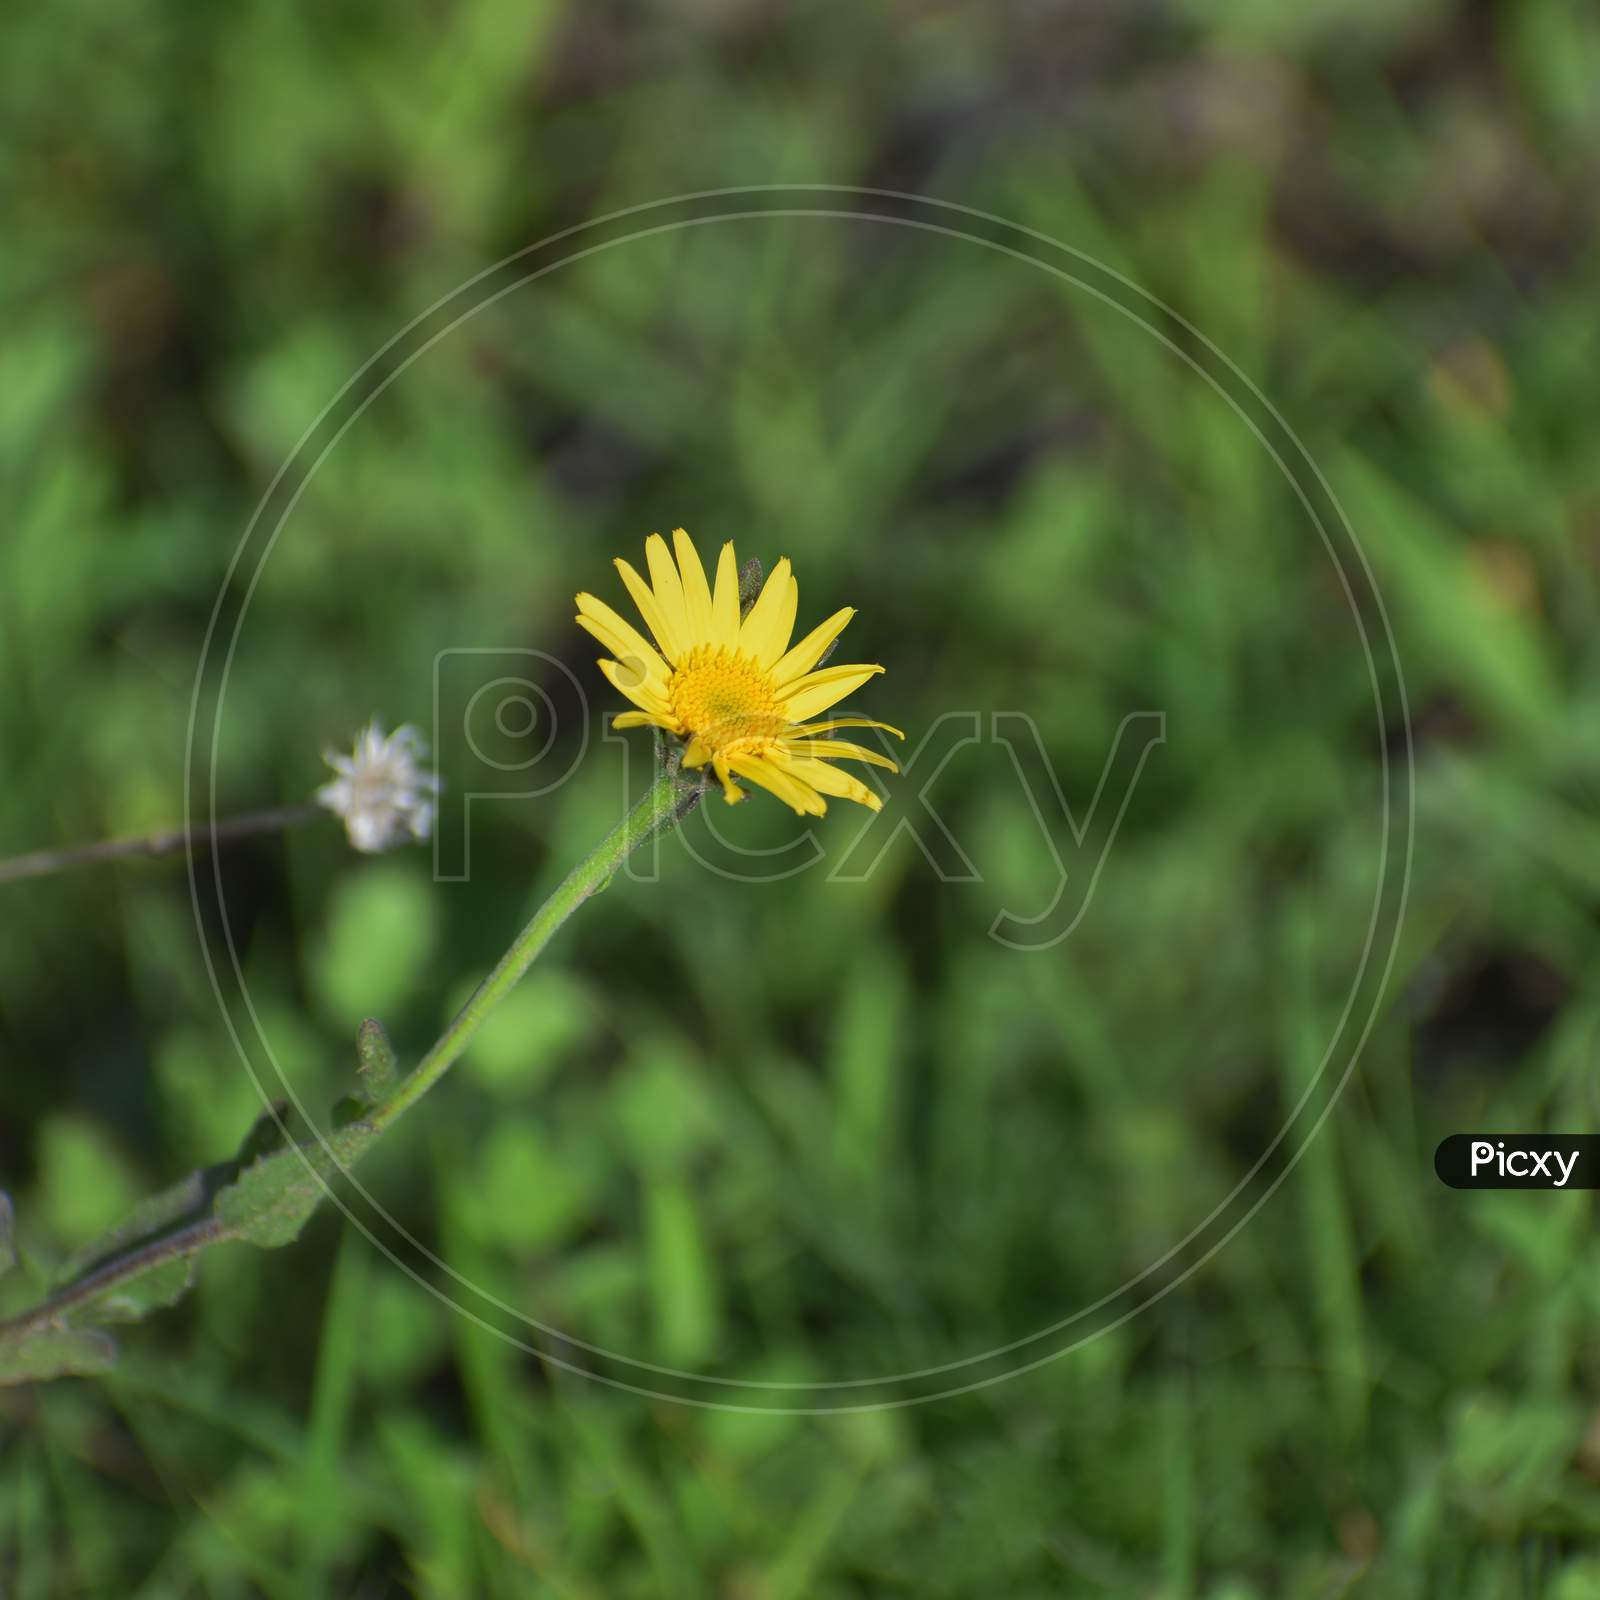 Isolated small yellow flower